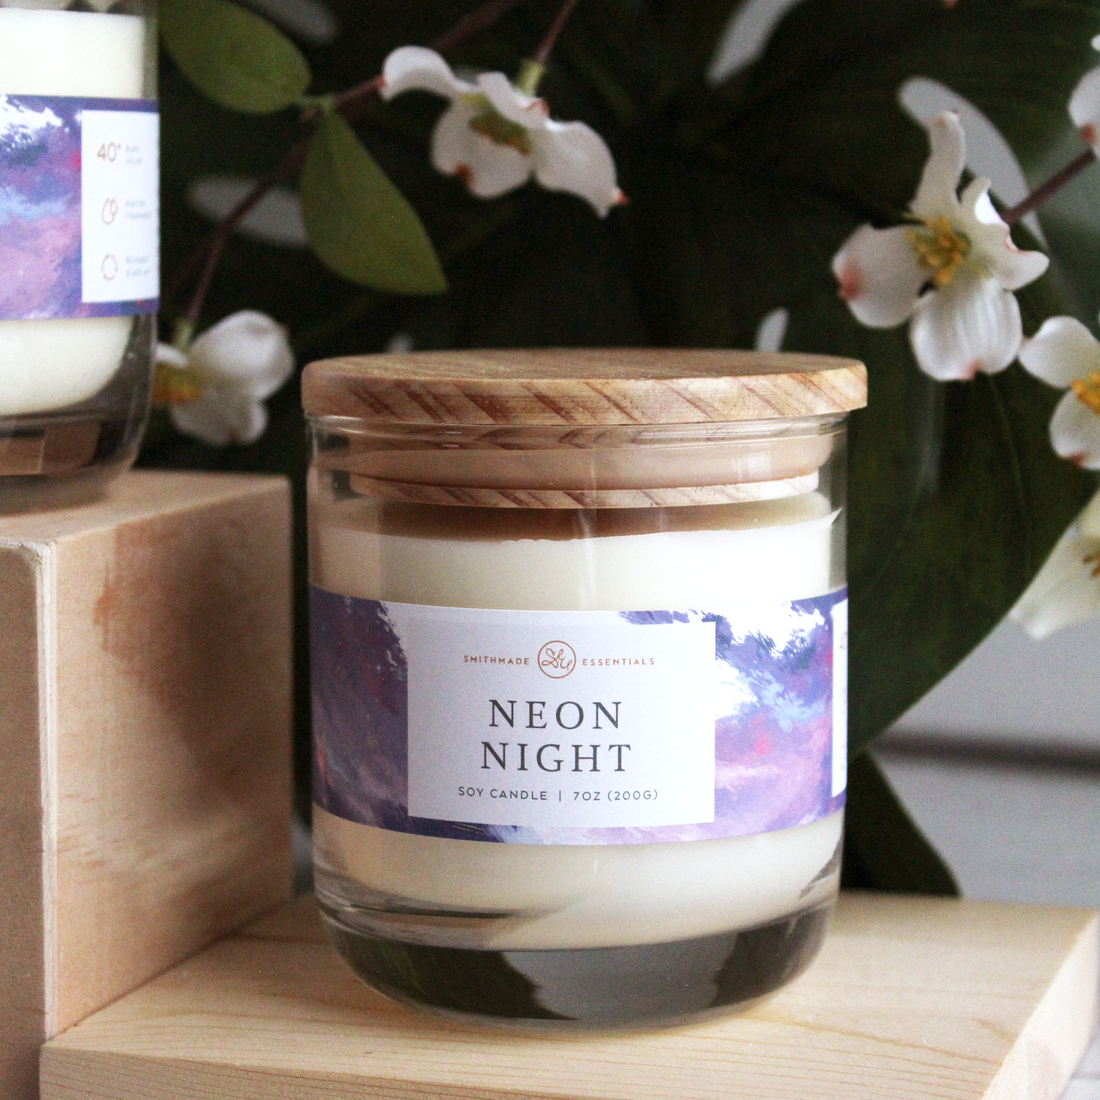 Neon Night Soy Candle